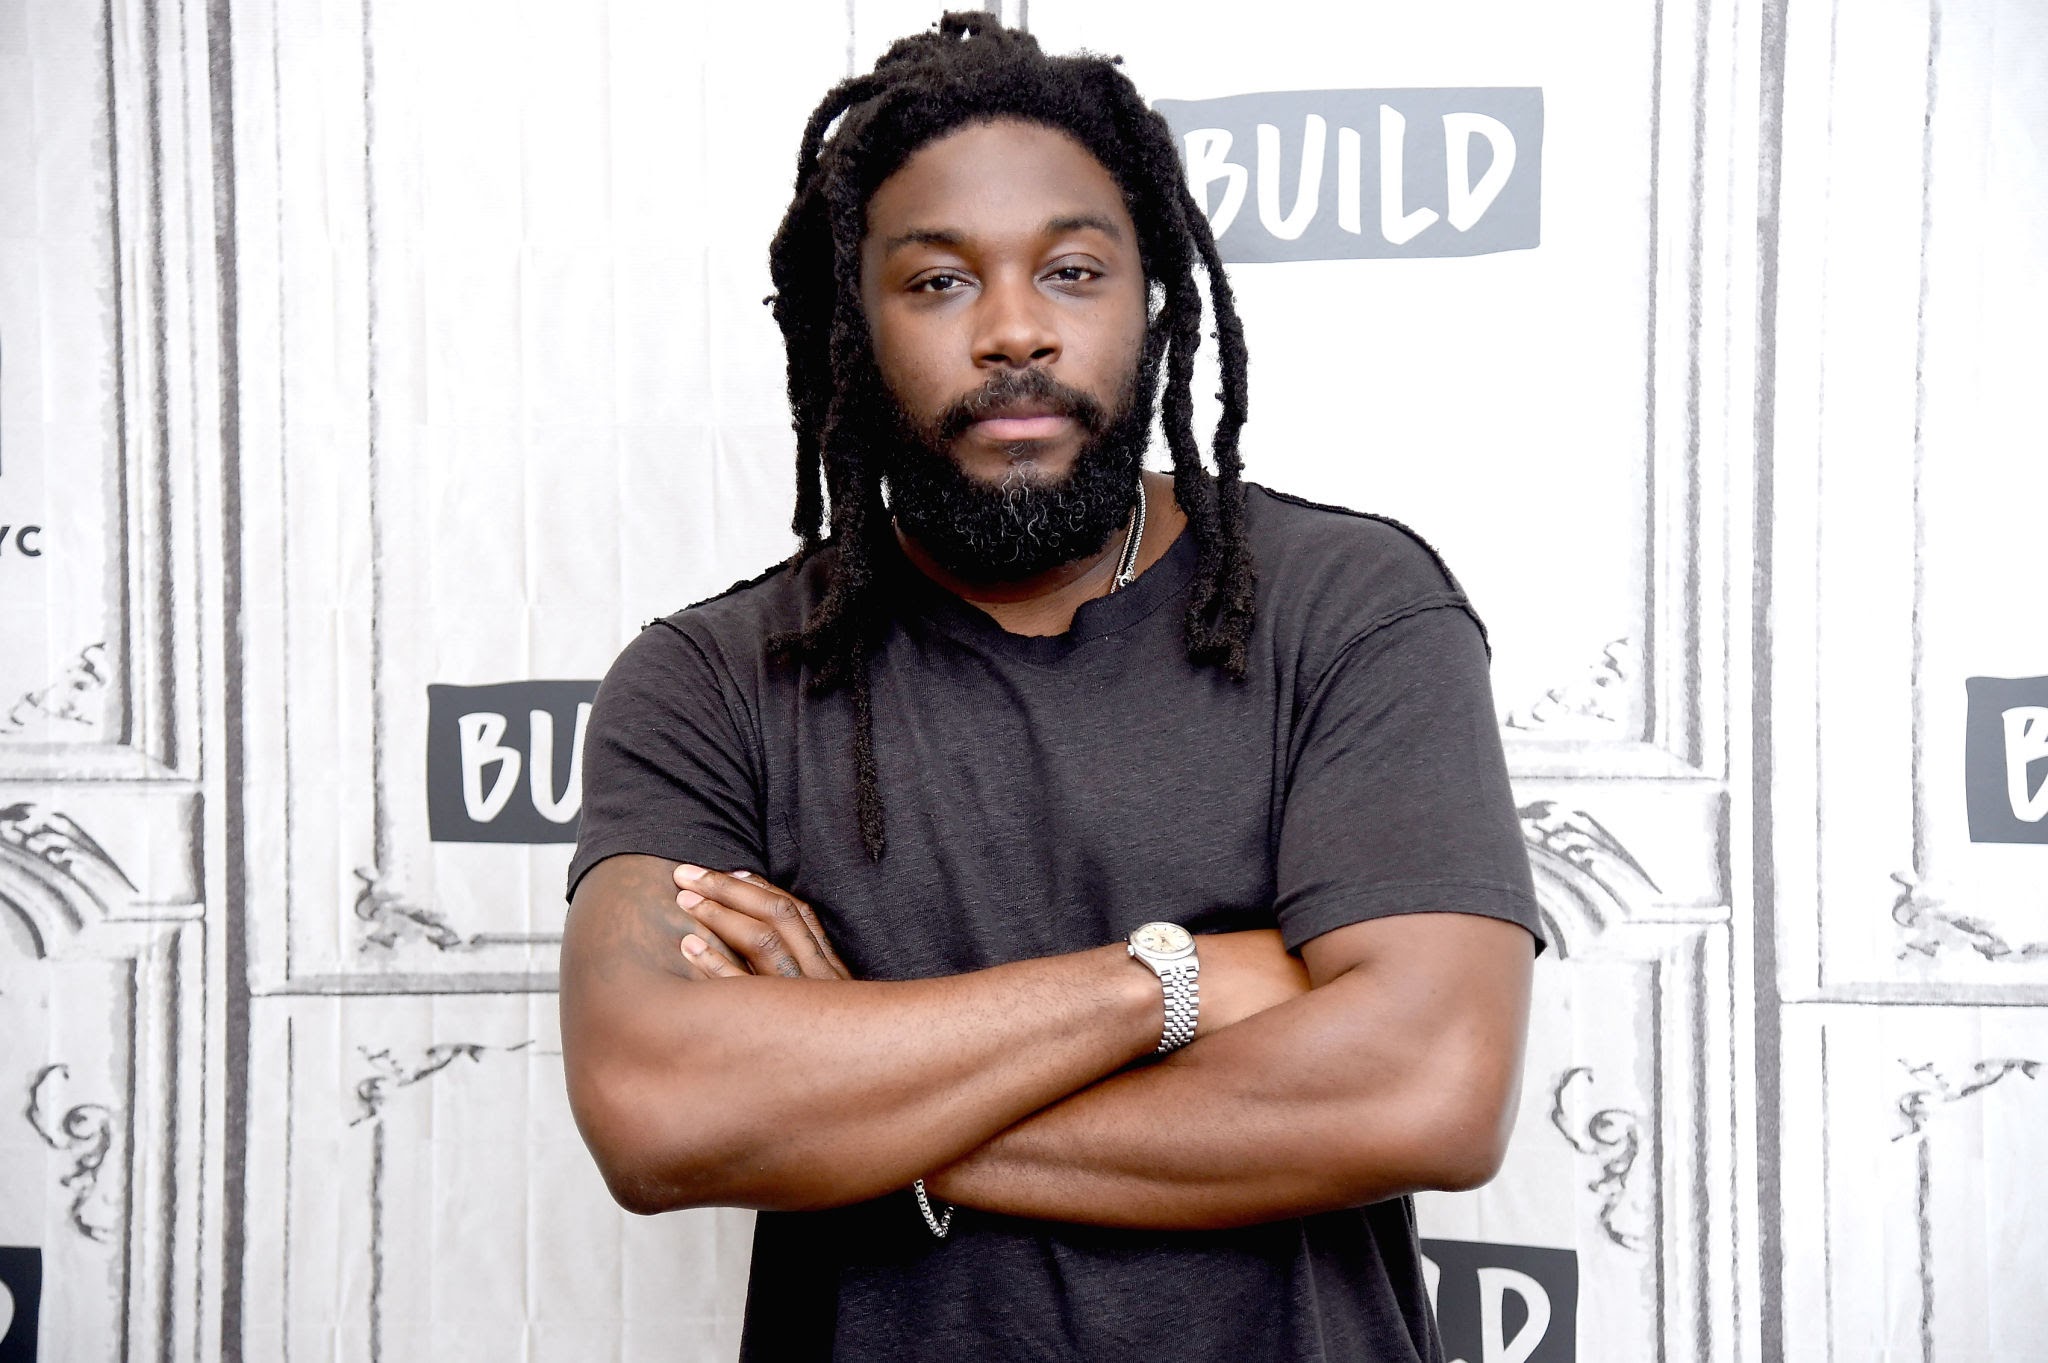 Author Jason Reynolds. He is a black man with a beard and locked hair looking straight at the camera. He is wearing a short sleeved black t-shirt, and has his arms crossed. 